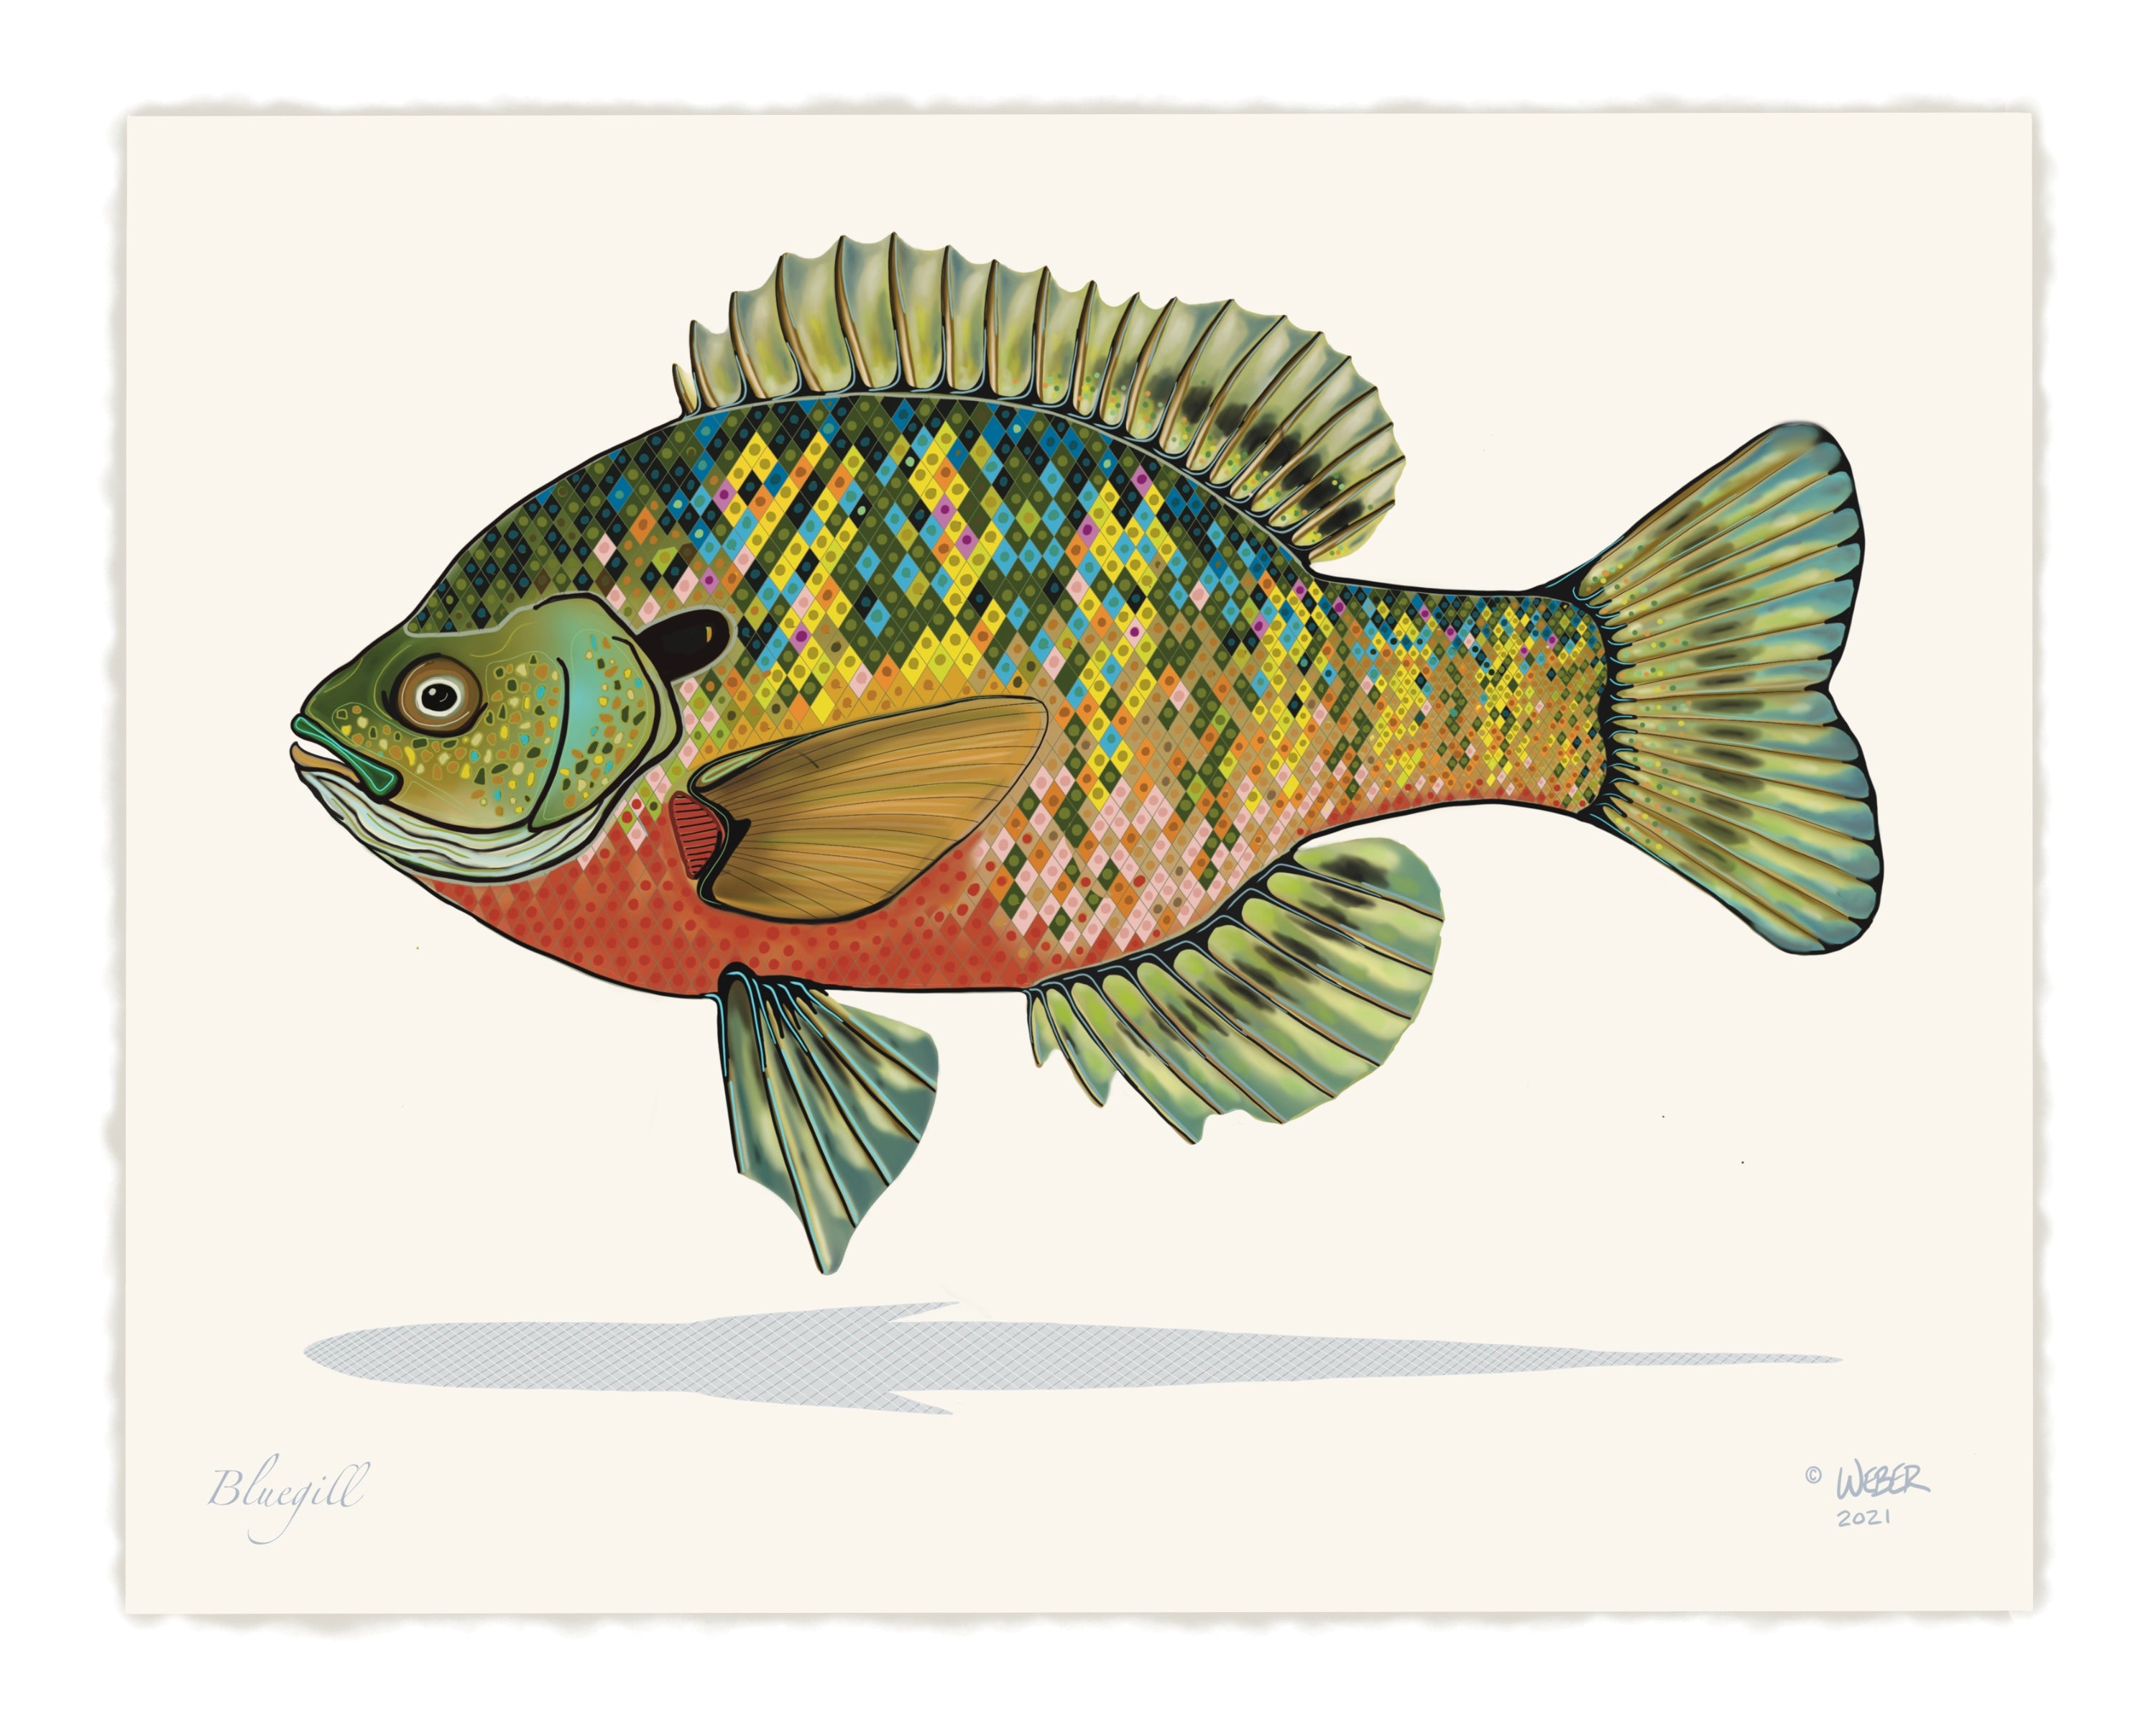 Print Collection - Blue Gill Sun Fish